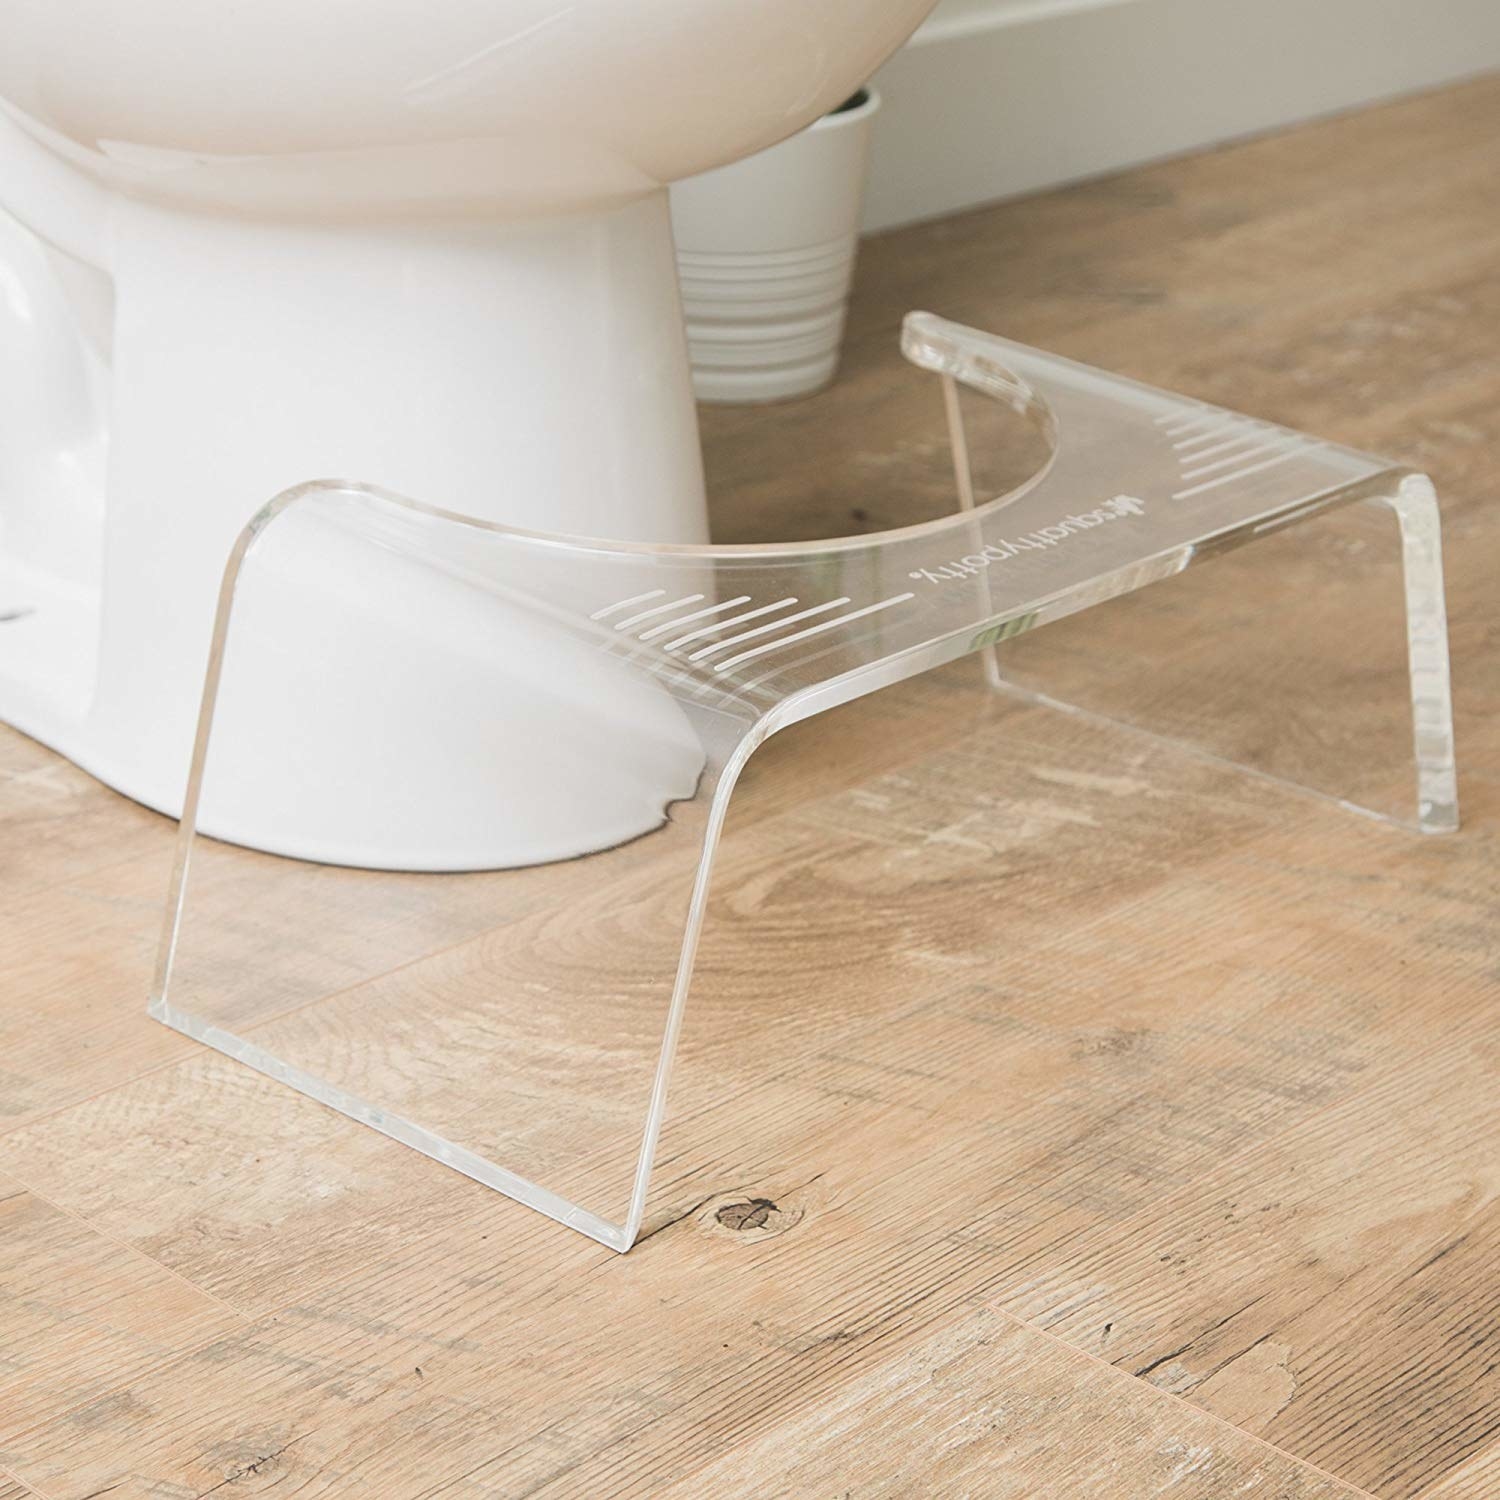 clear acrylic stool that fits in front of a toilet